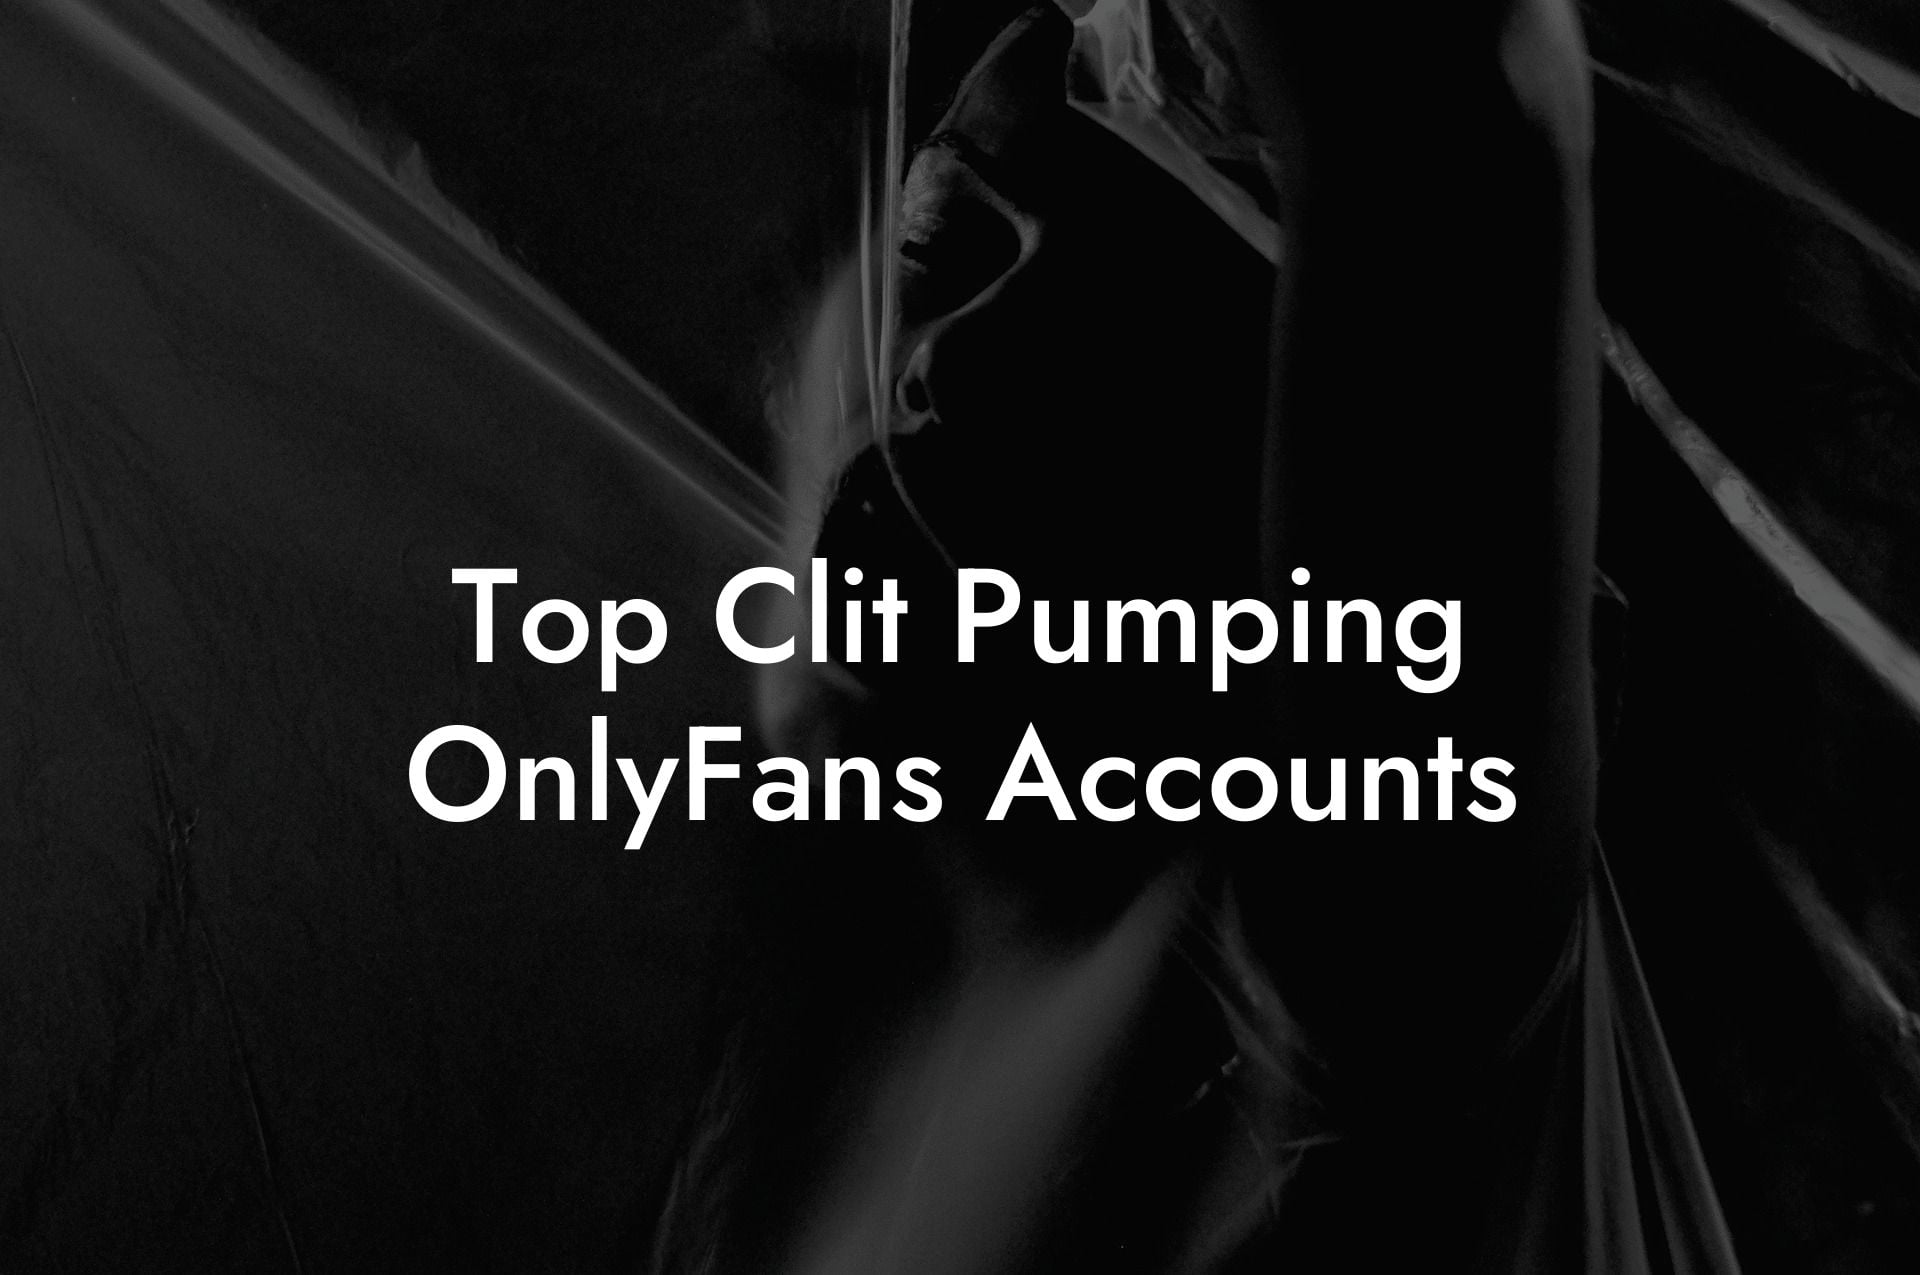 Top Clit Pumping OnlyFans Accounts